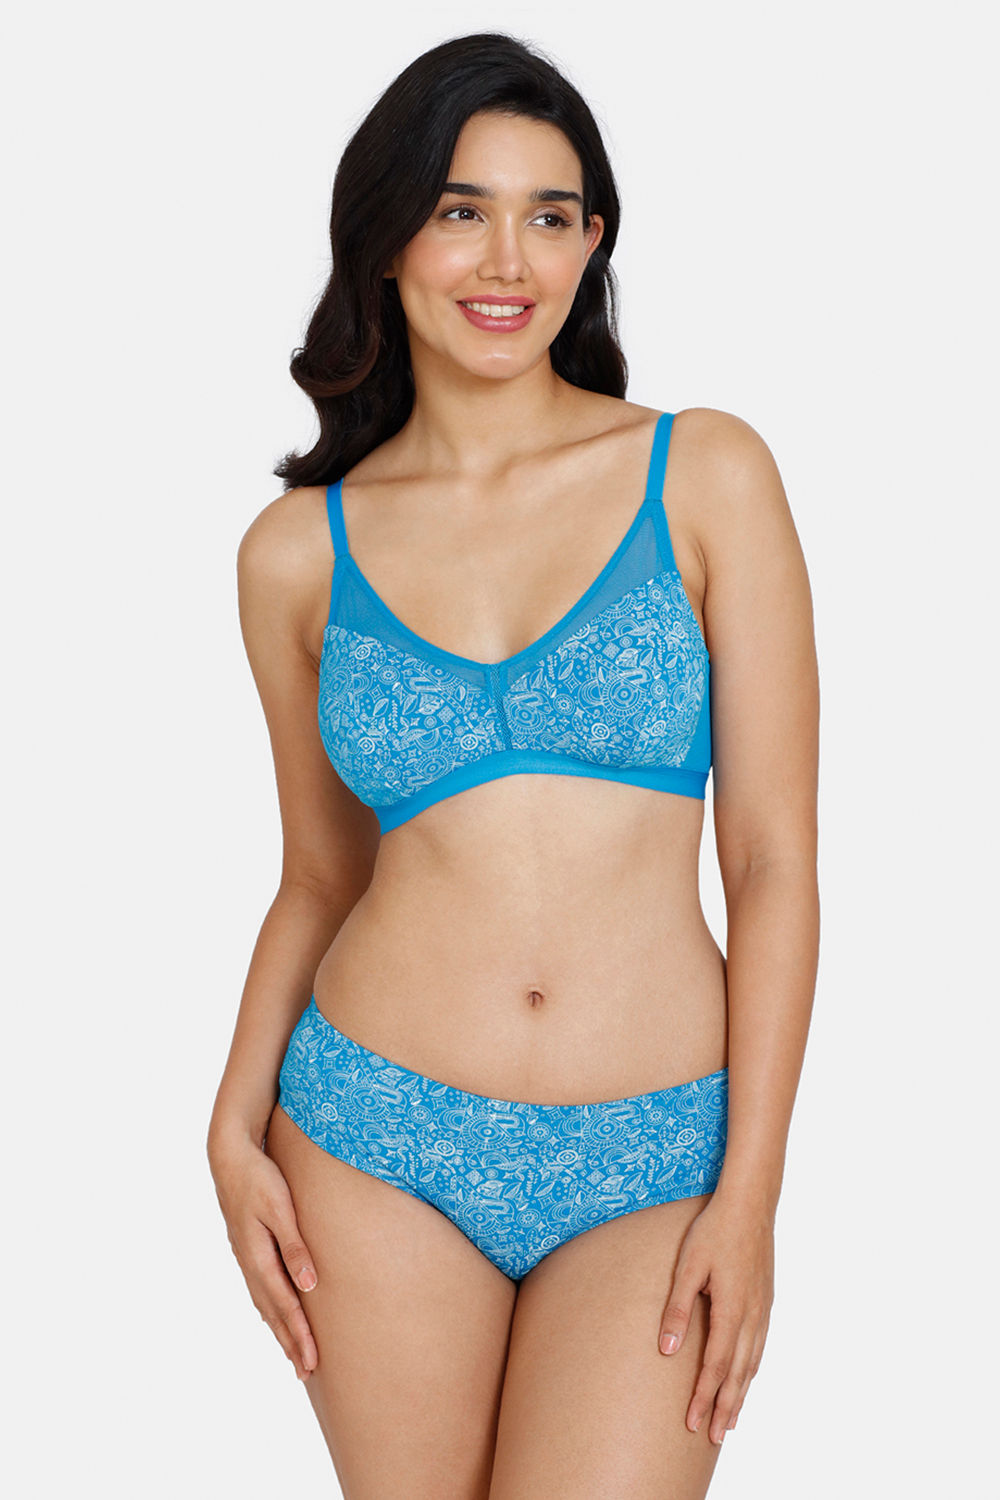 Women's Lingerie & Clothing Online in India (Page 68)